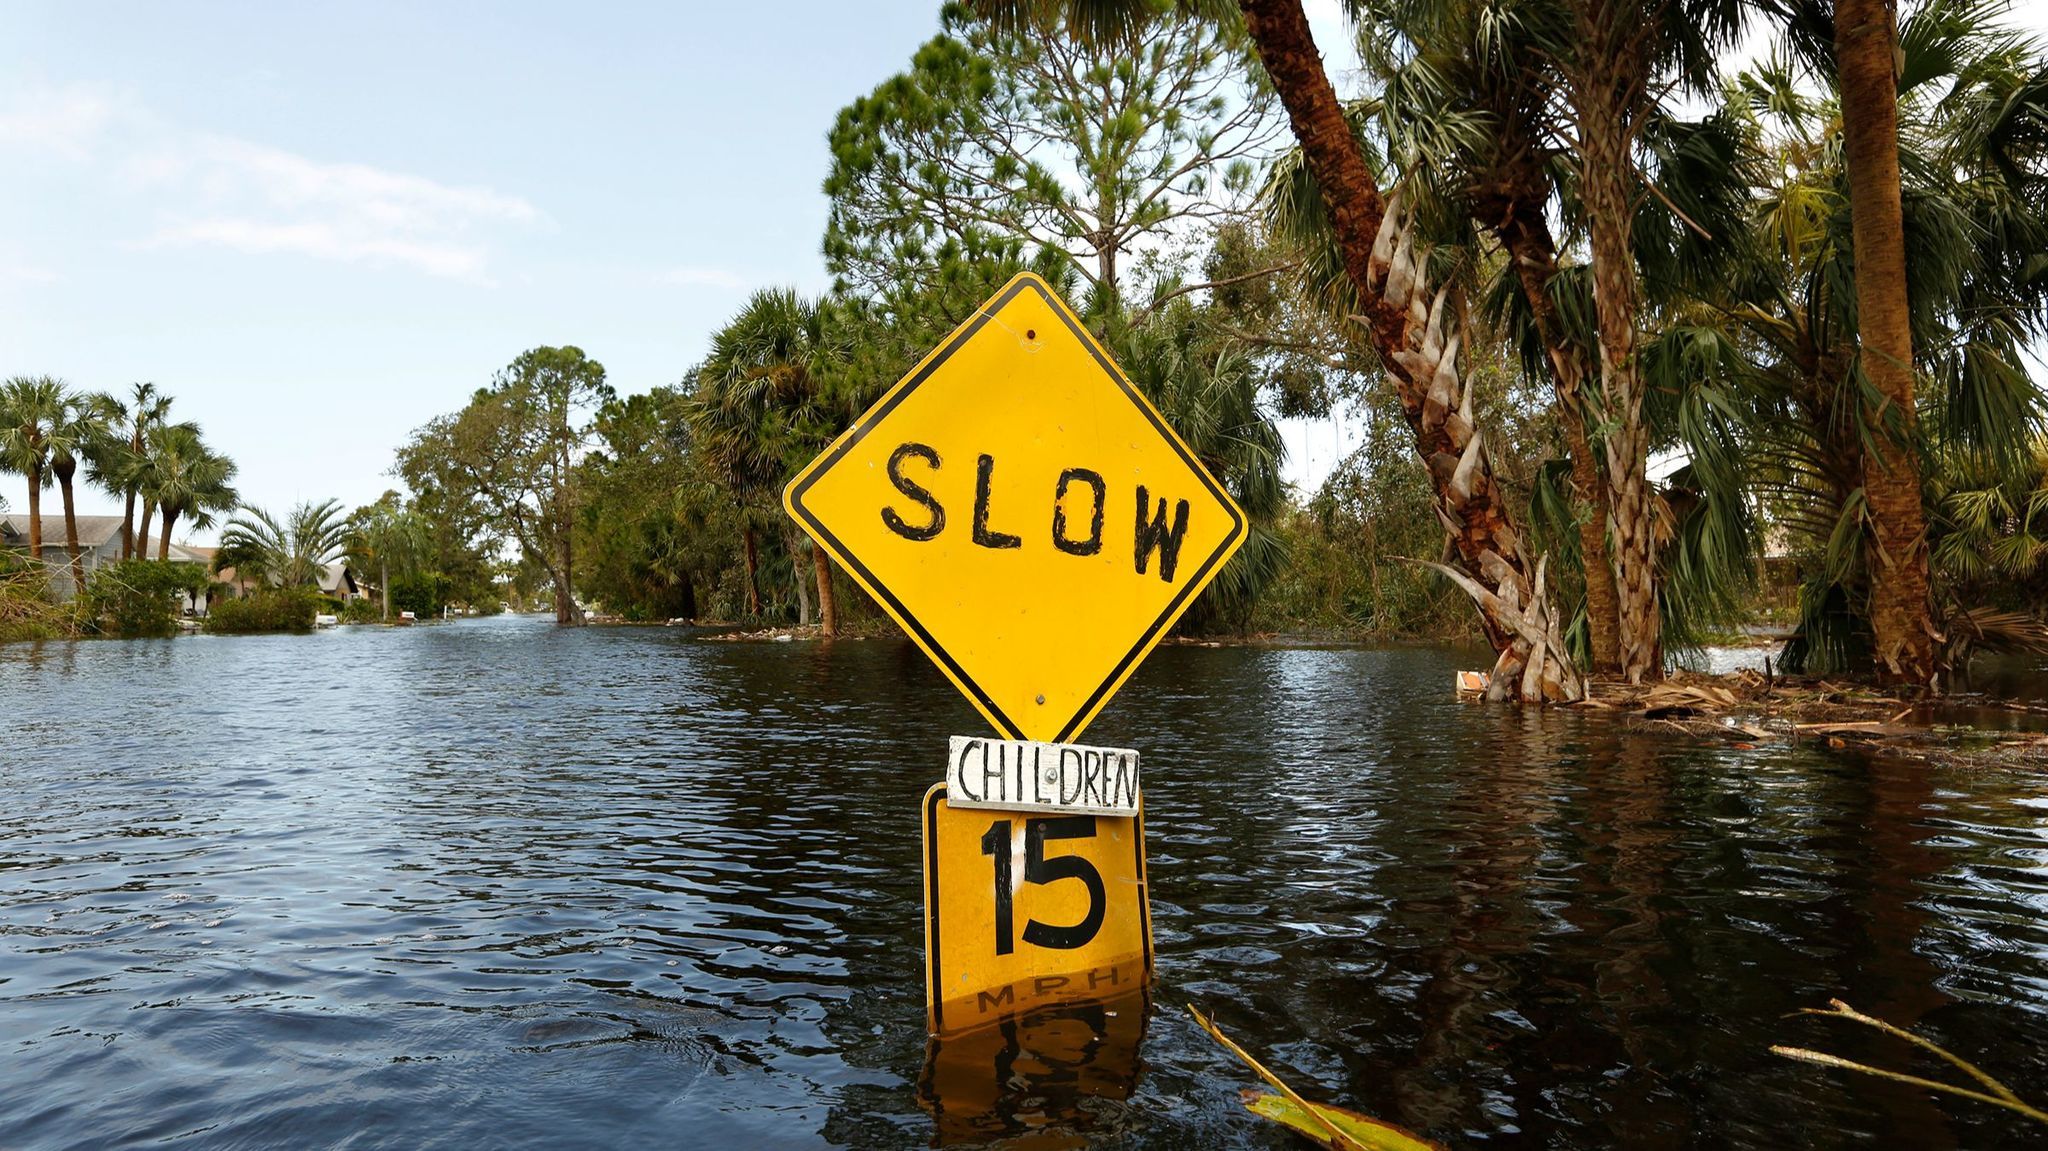 In Bonita Springs, Fla., floodwaters reached waist deep in some areas, flooding homes and cars.